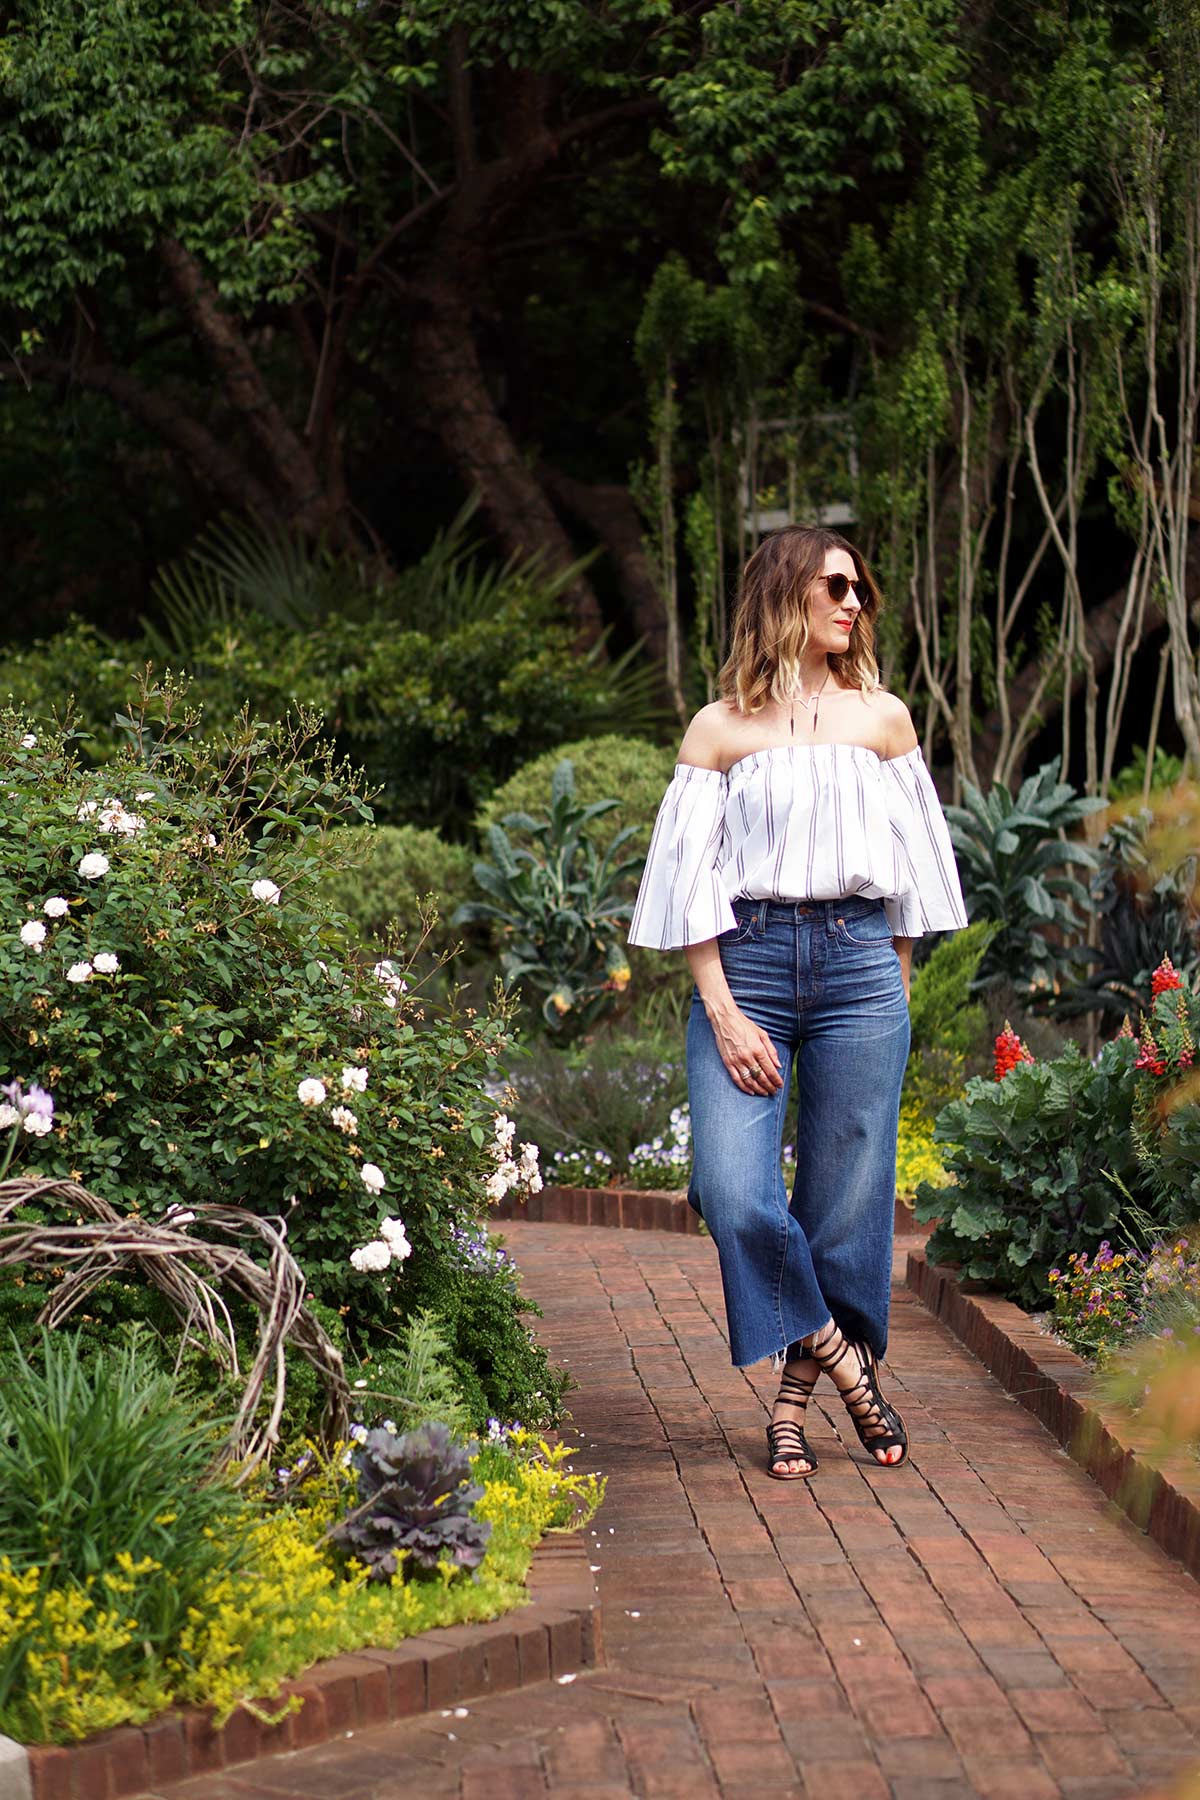 HOW TO STYLE: DENIM CULOTTES